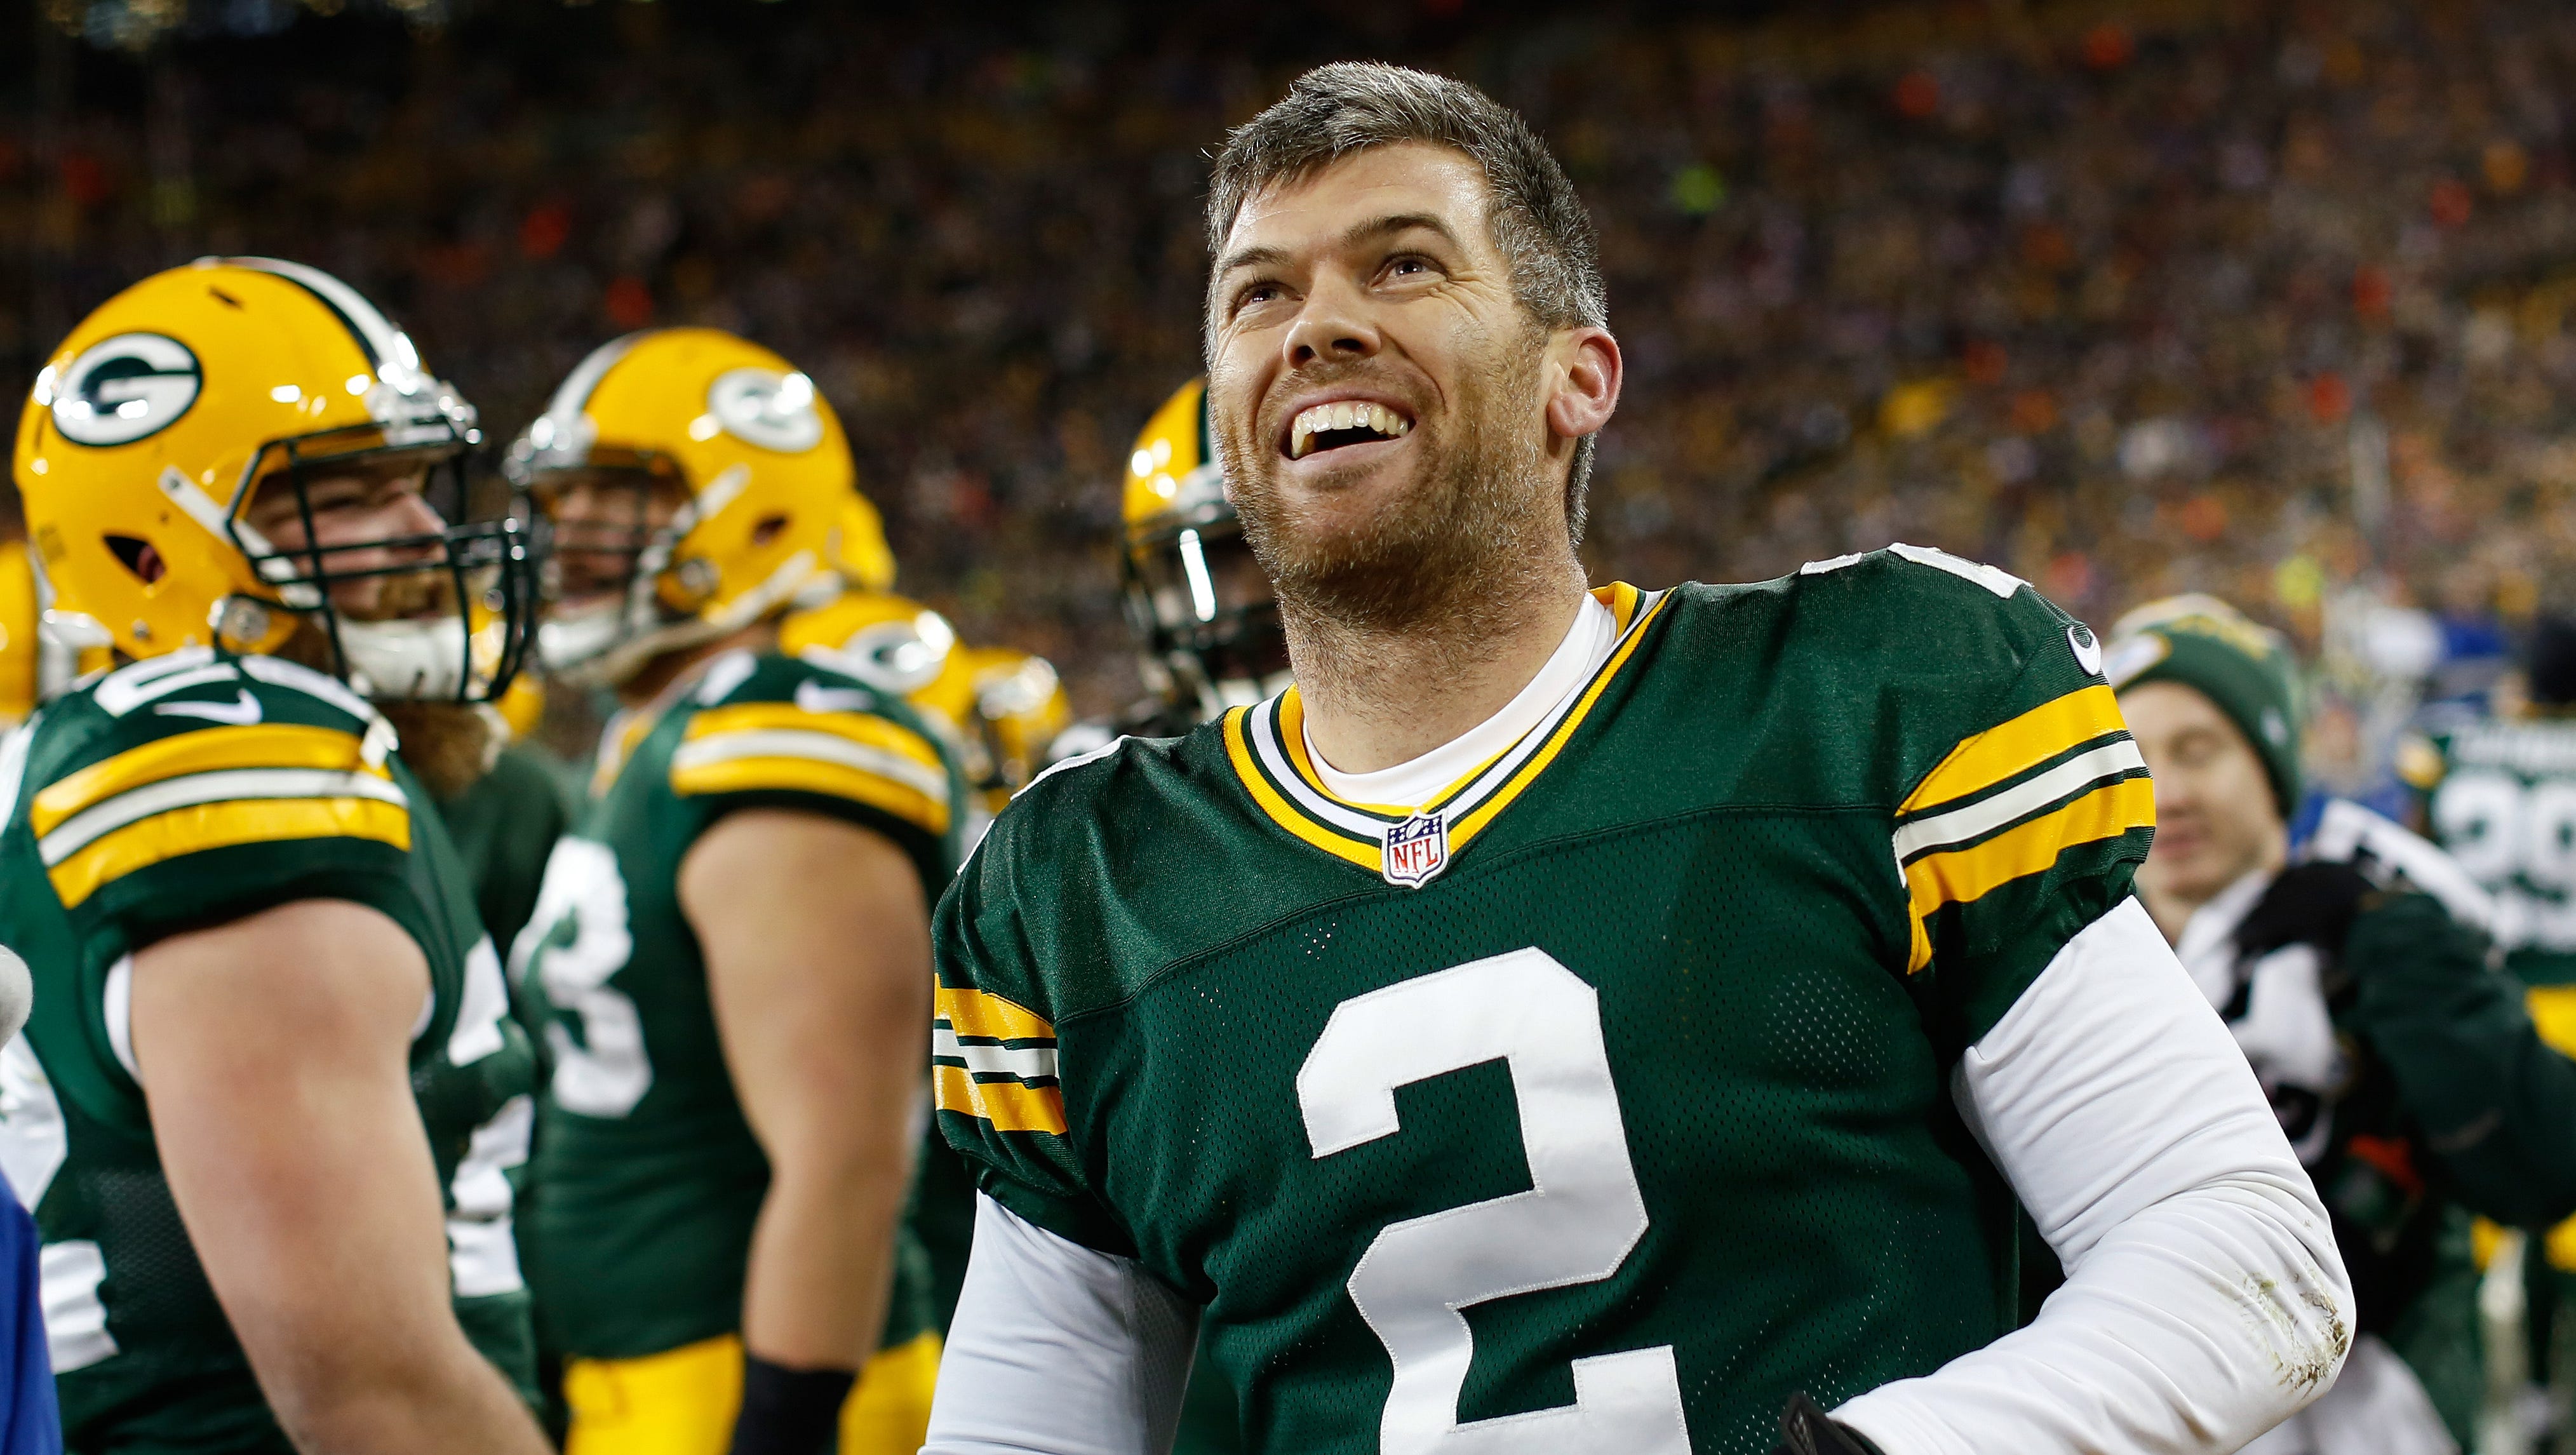 Green Bay Packers kicker Mason Crosby (2) smiles while watching the replay of his forced fumble on Jan. 3, 2016, against the Minnesota Vikings at Lambeau Field.